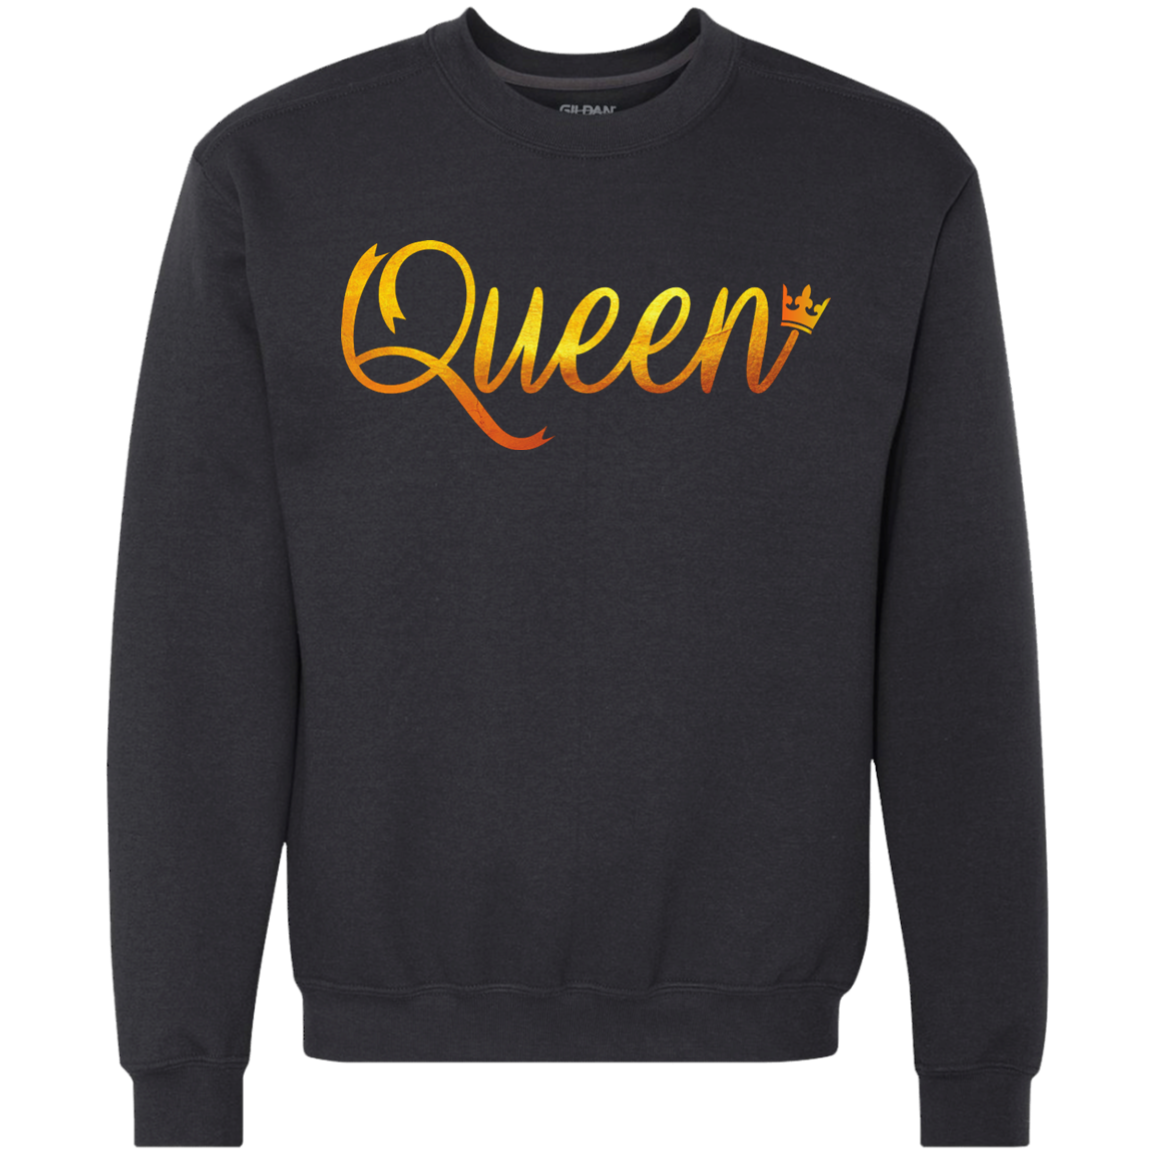 "Queen" Lesbian Couple Valentine's Day Special Shirt